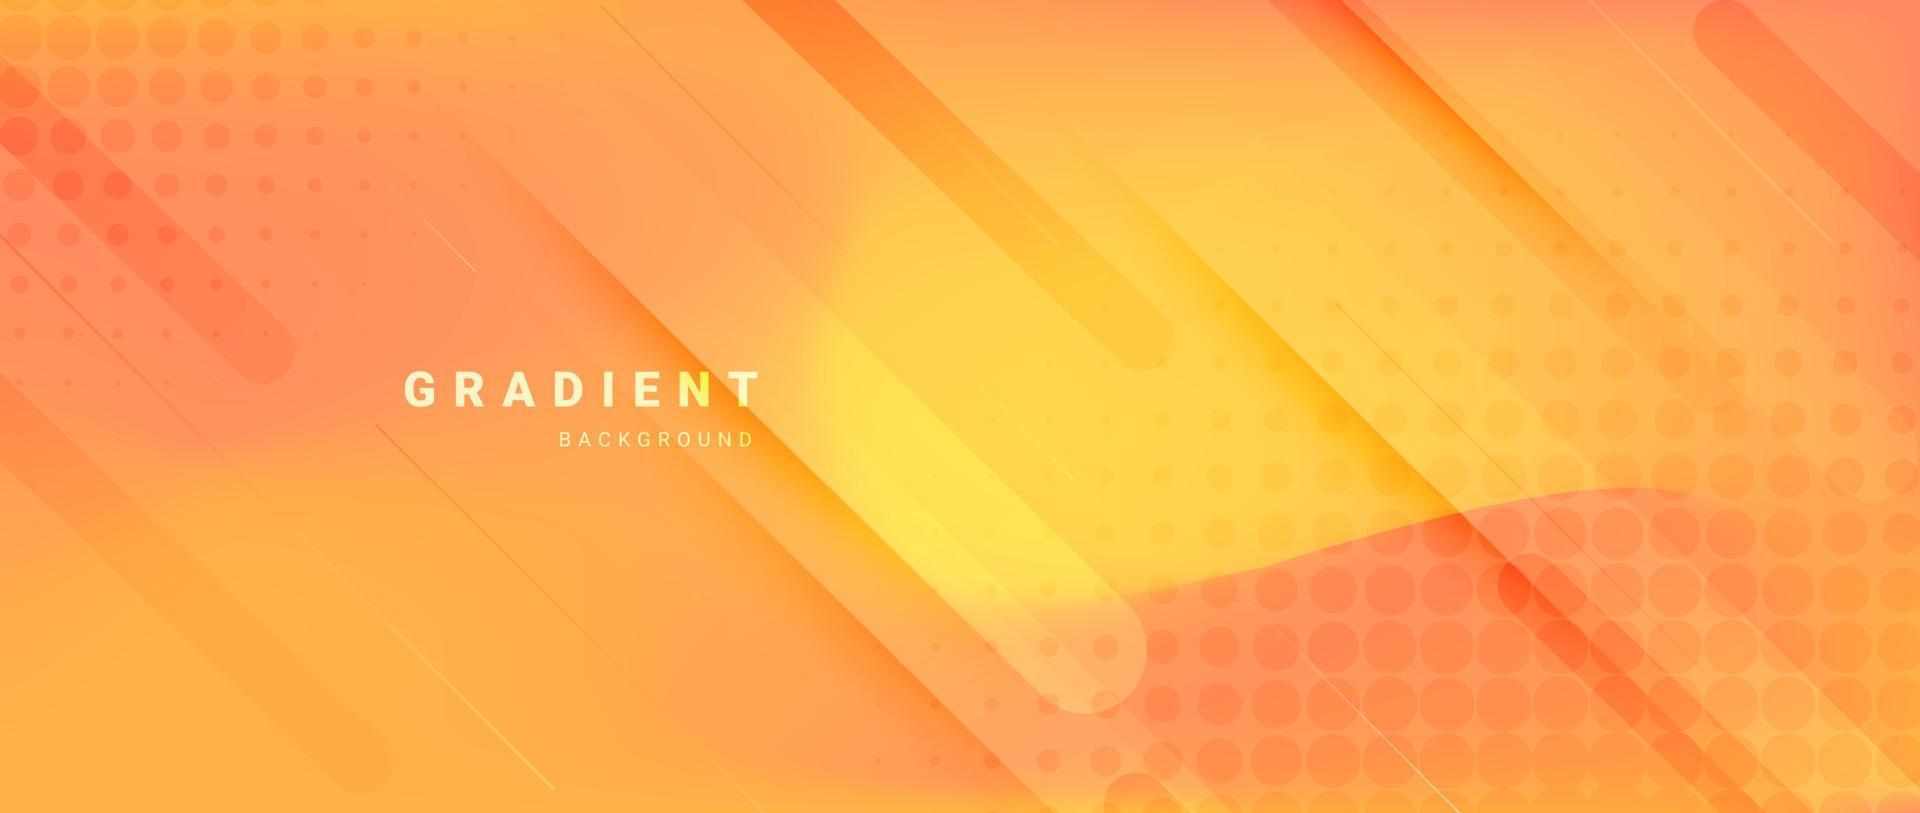 Abstract yellow and orange gradient background with dynamic shapes and halftone. vector